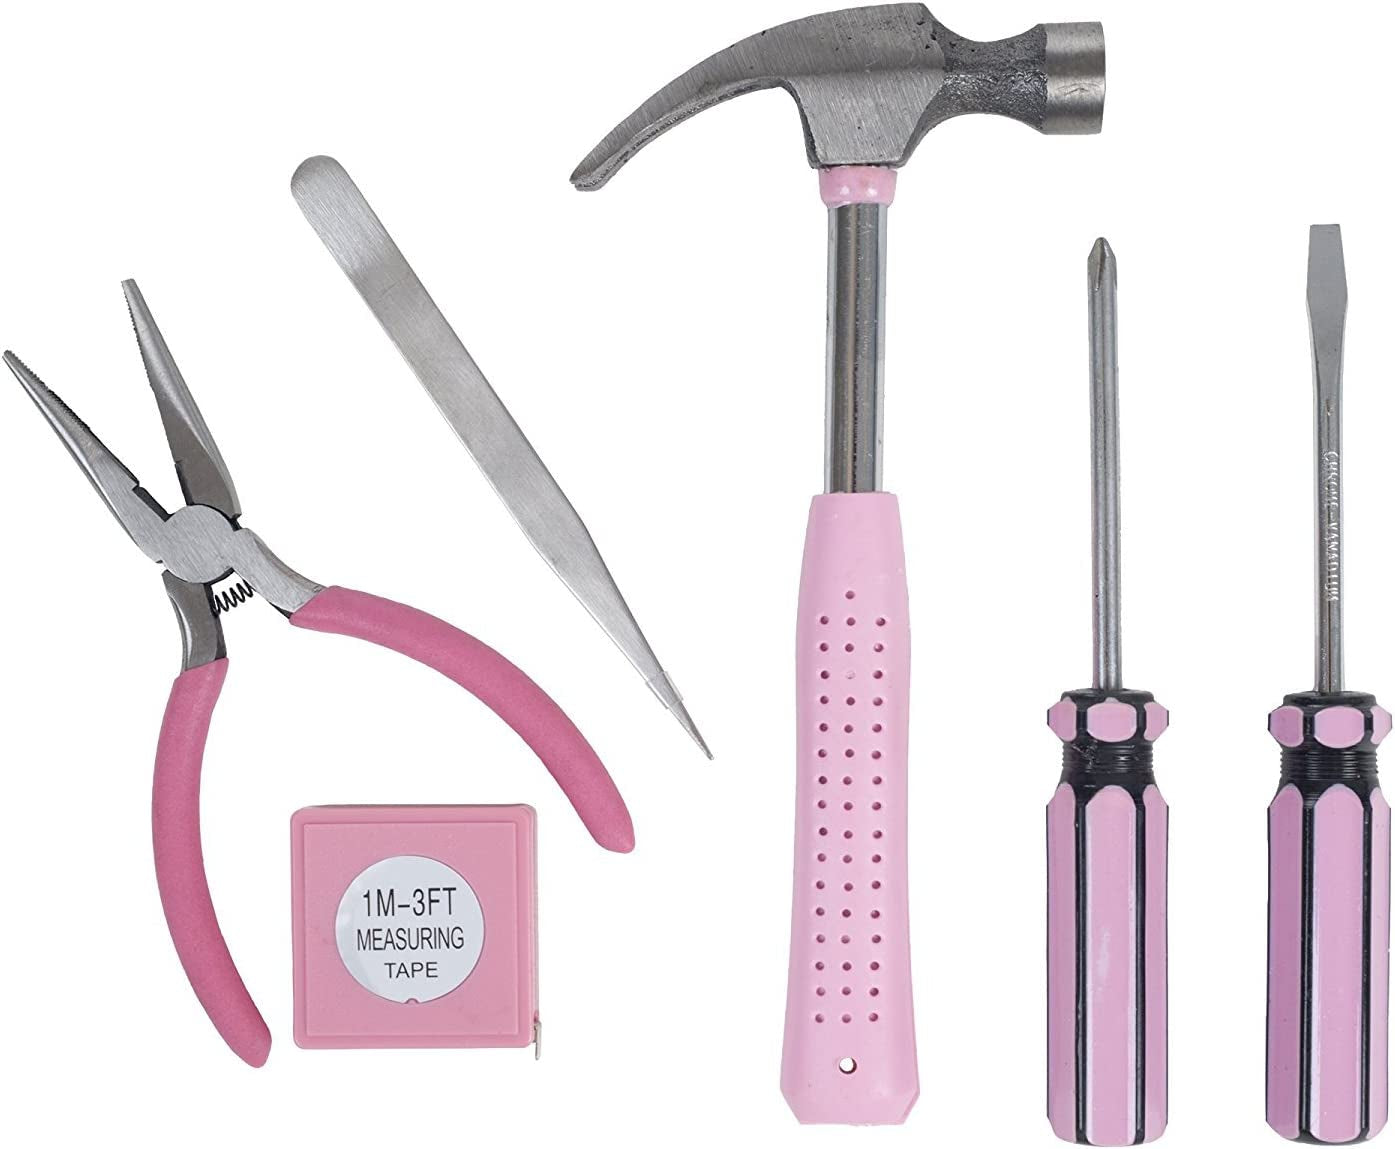 Household Hand Tools, Tool Set - 7 Piece by , Set Includes – Hammer, Screwdriver Set, Pliers (Tool Kit for the Home, Office, or Car) (Pink)